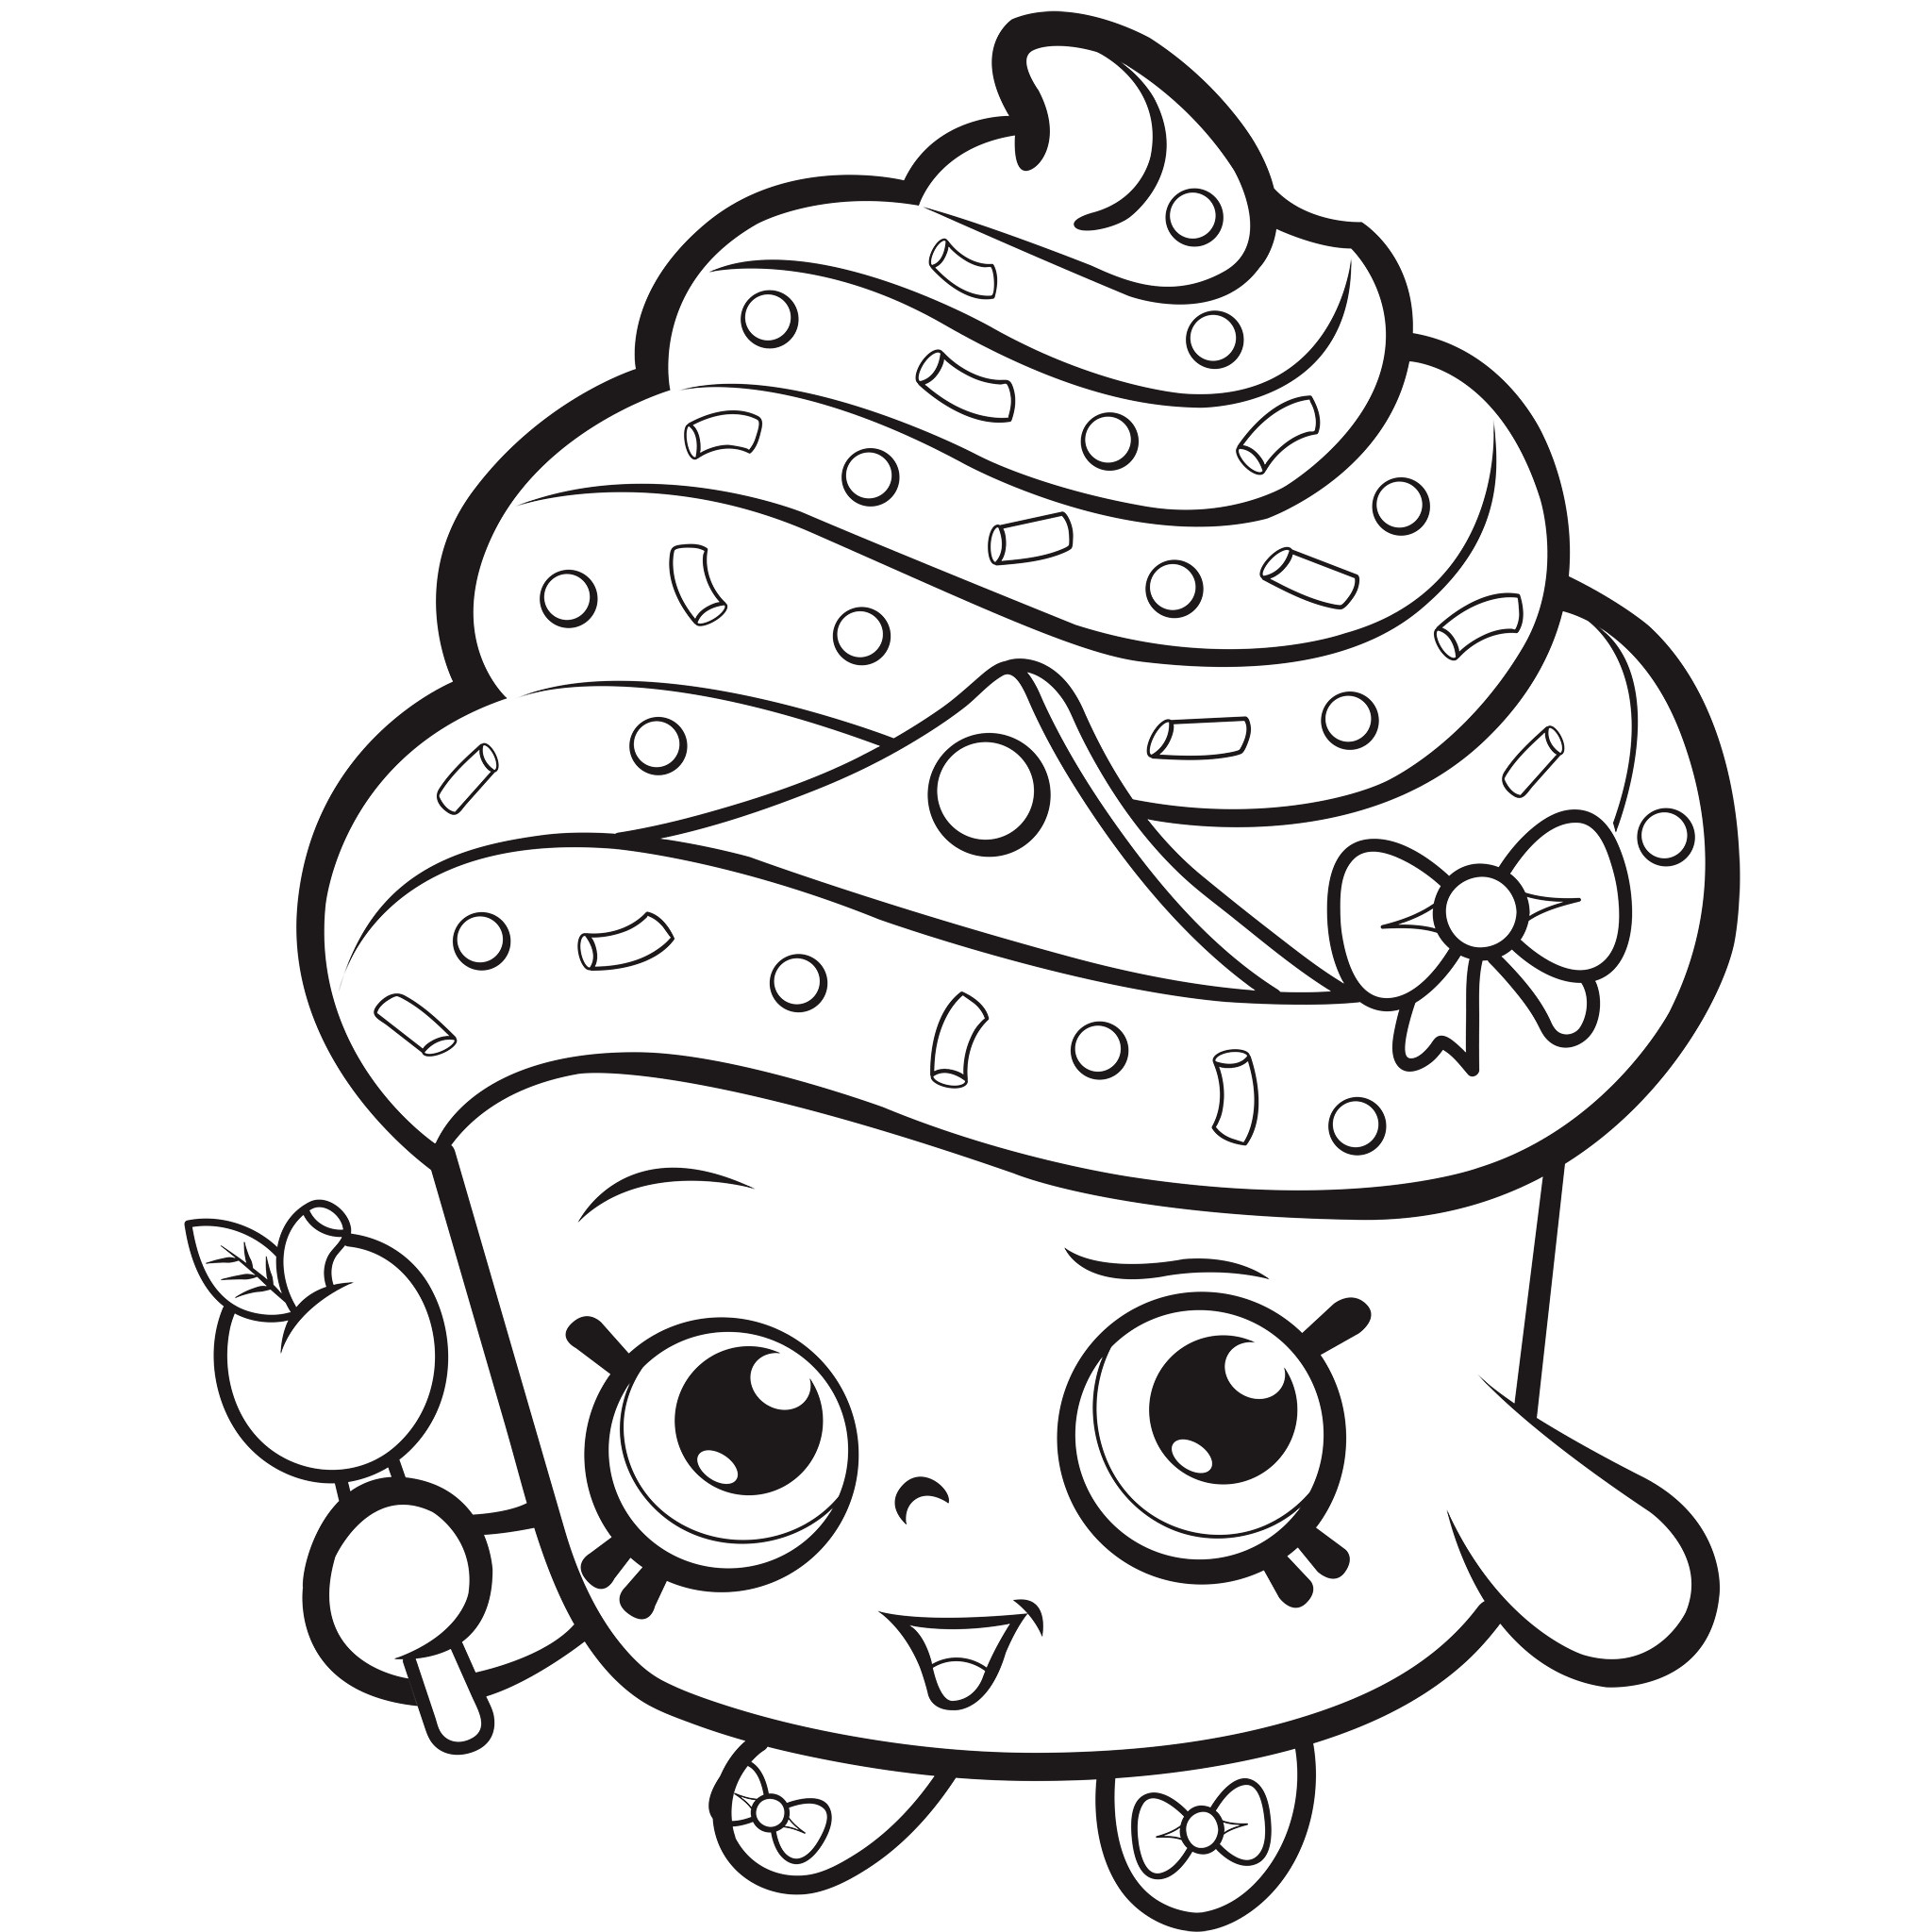 Shopkins Coloring Pages
 Shopkins Coloring Pages Best Coloring Pages For Kids